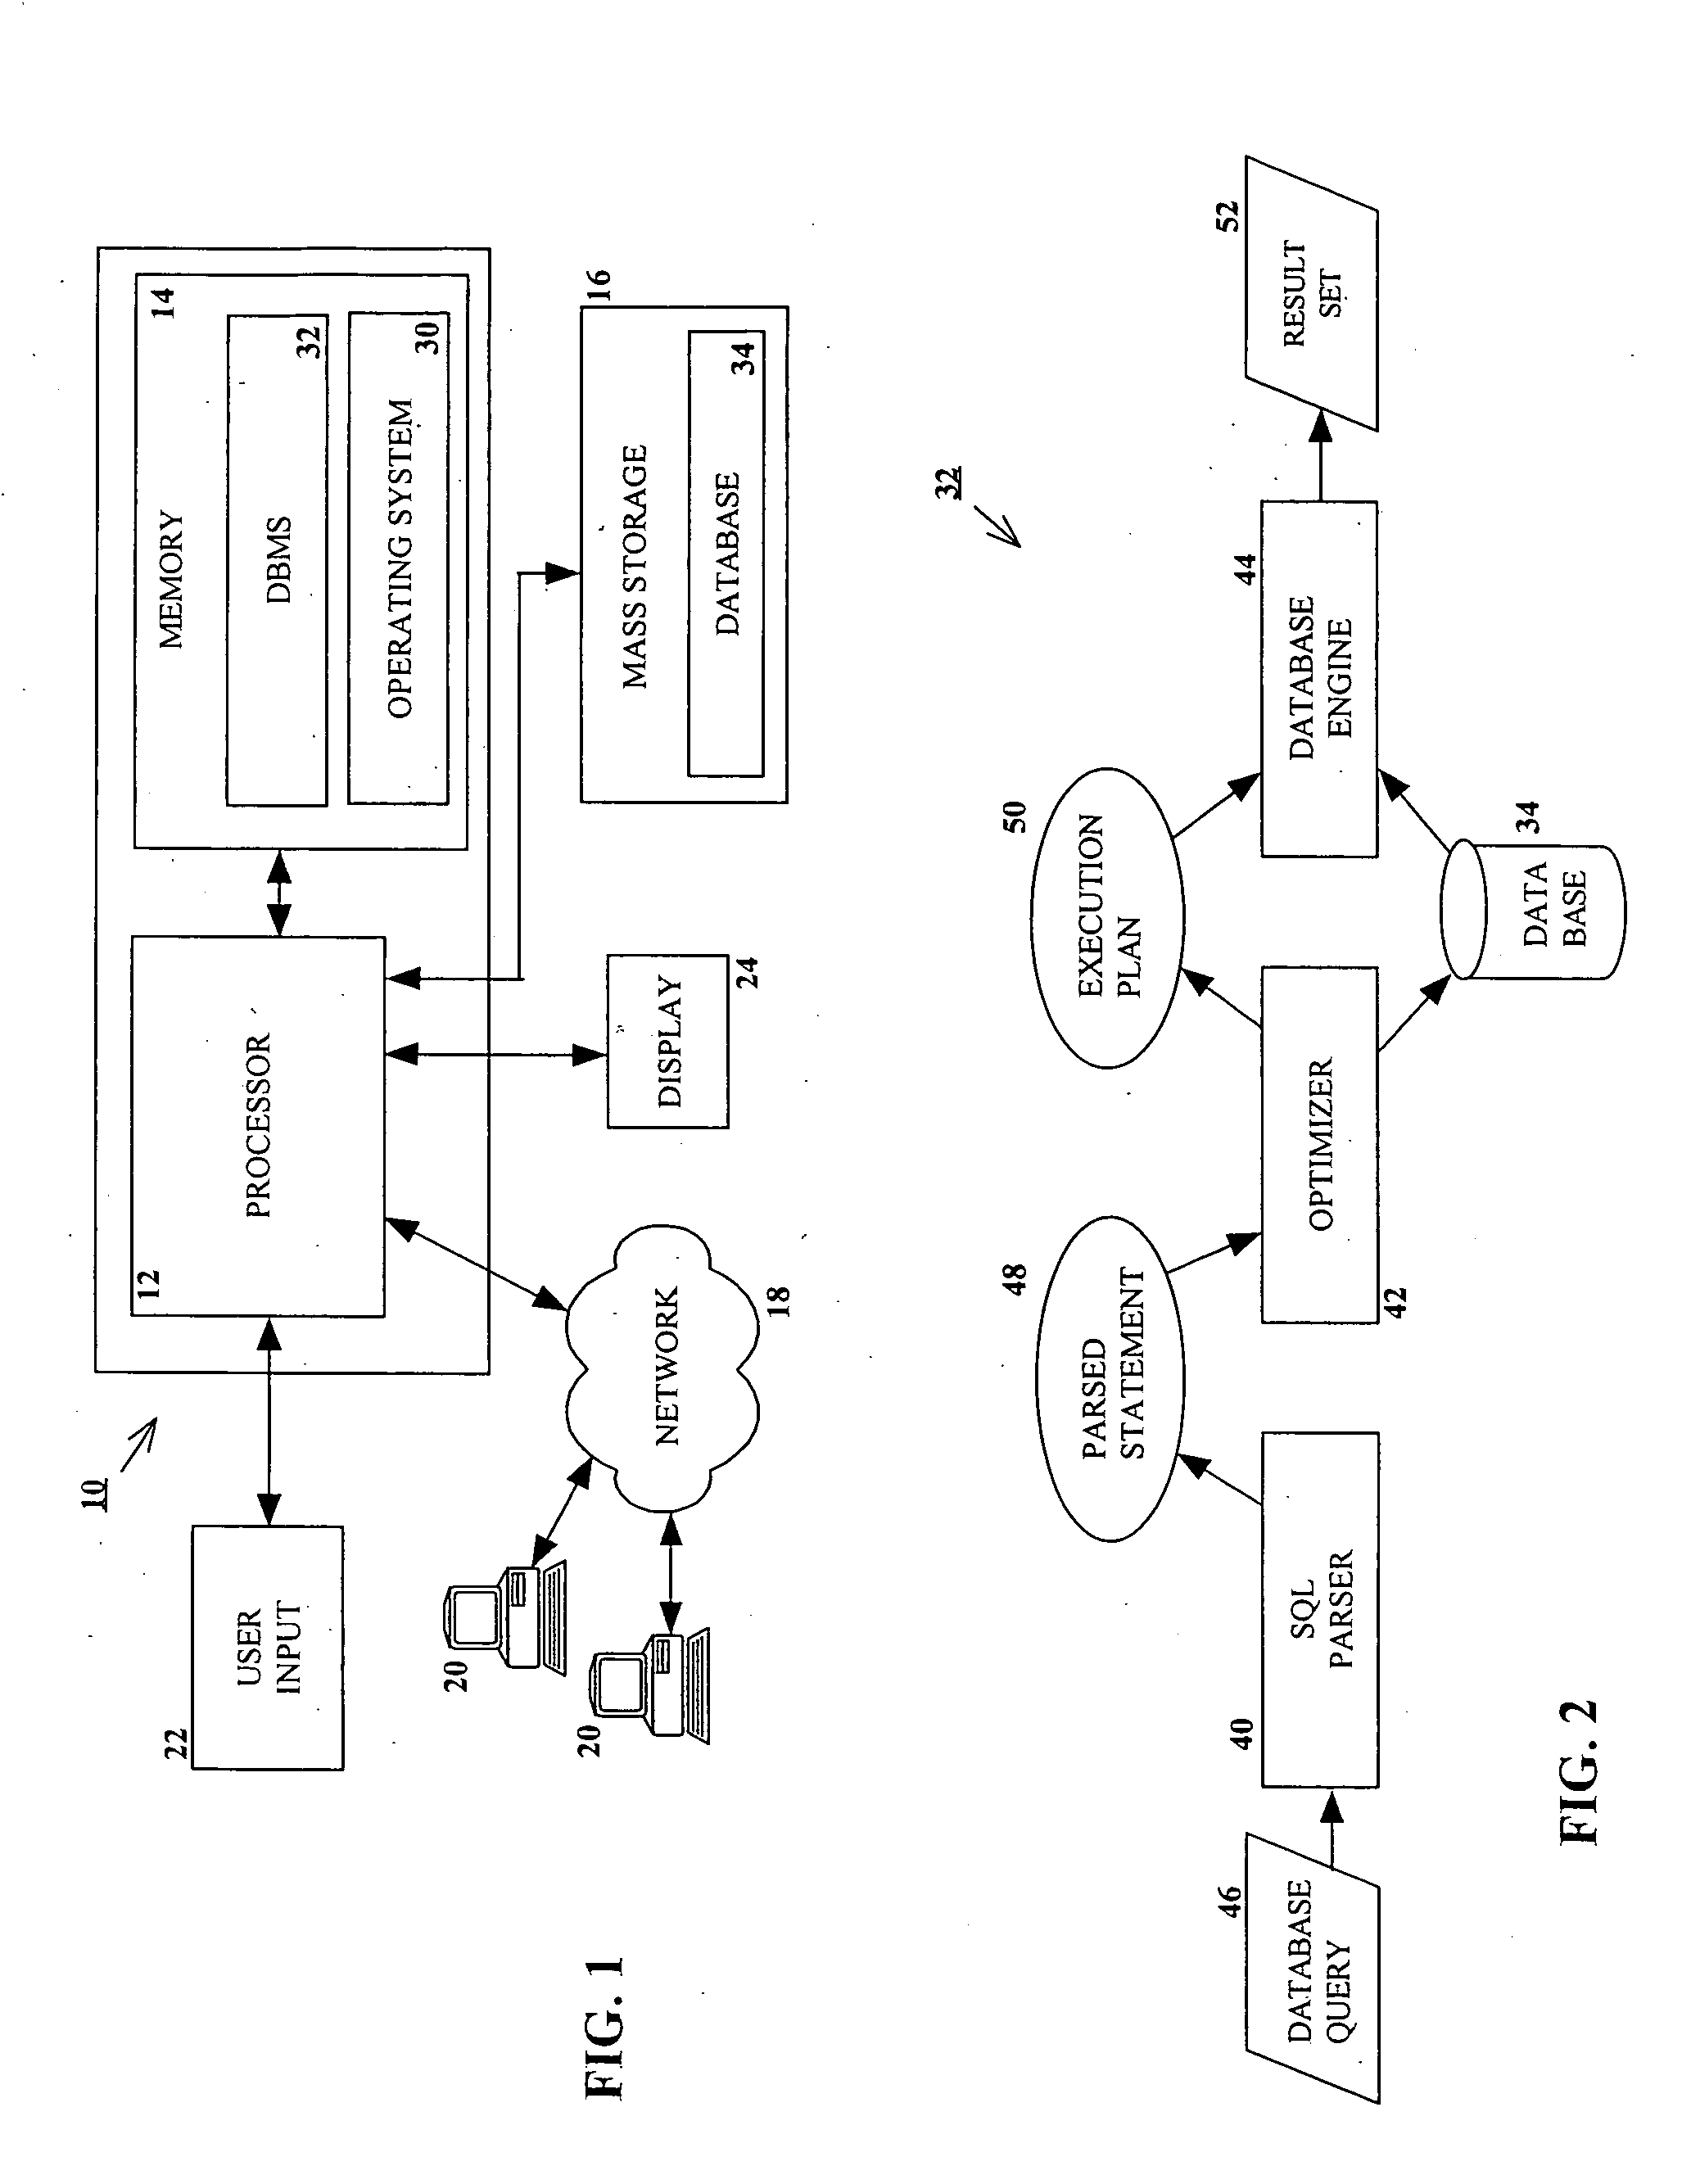 Method and system for a self-healing query access plan